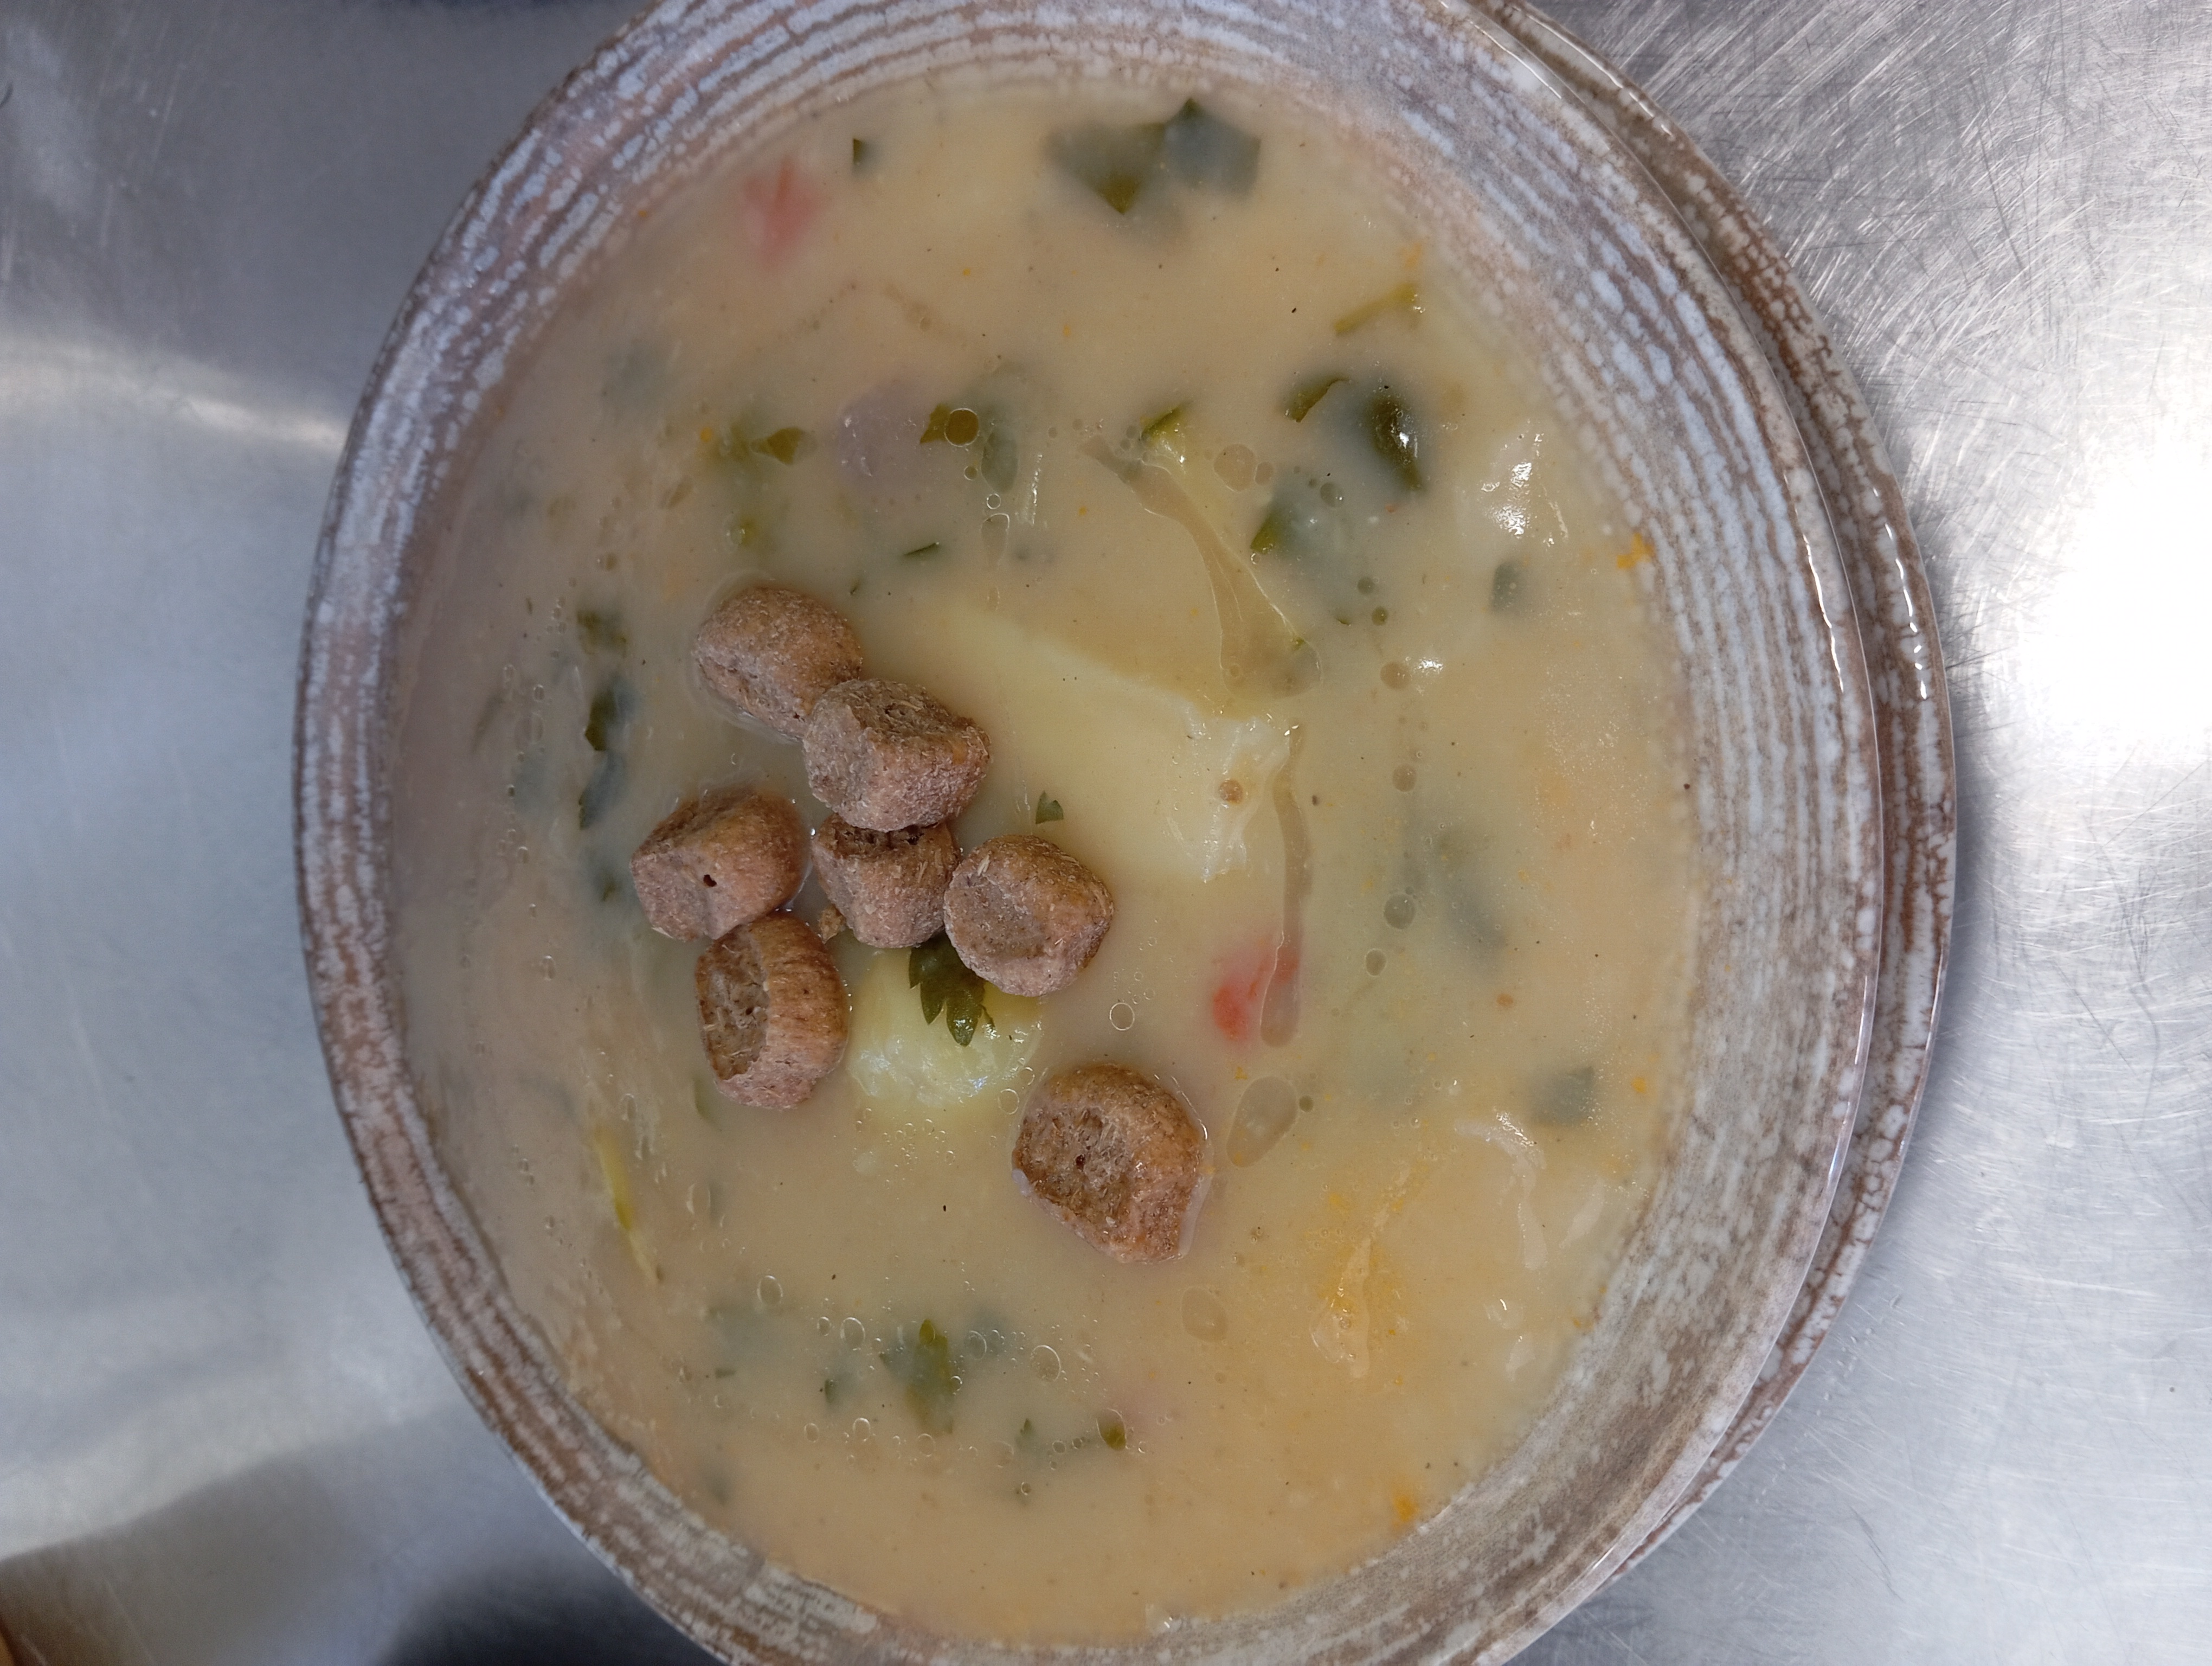 Ask us about the soup of the day!